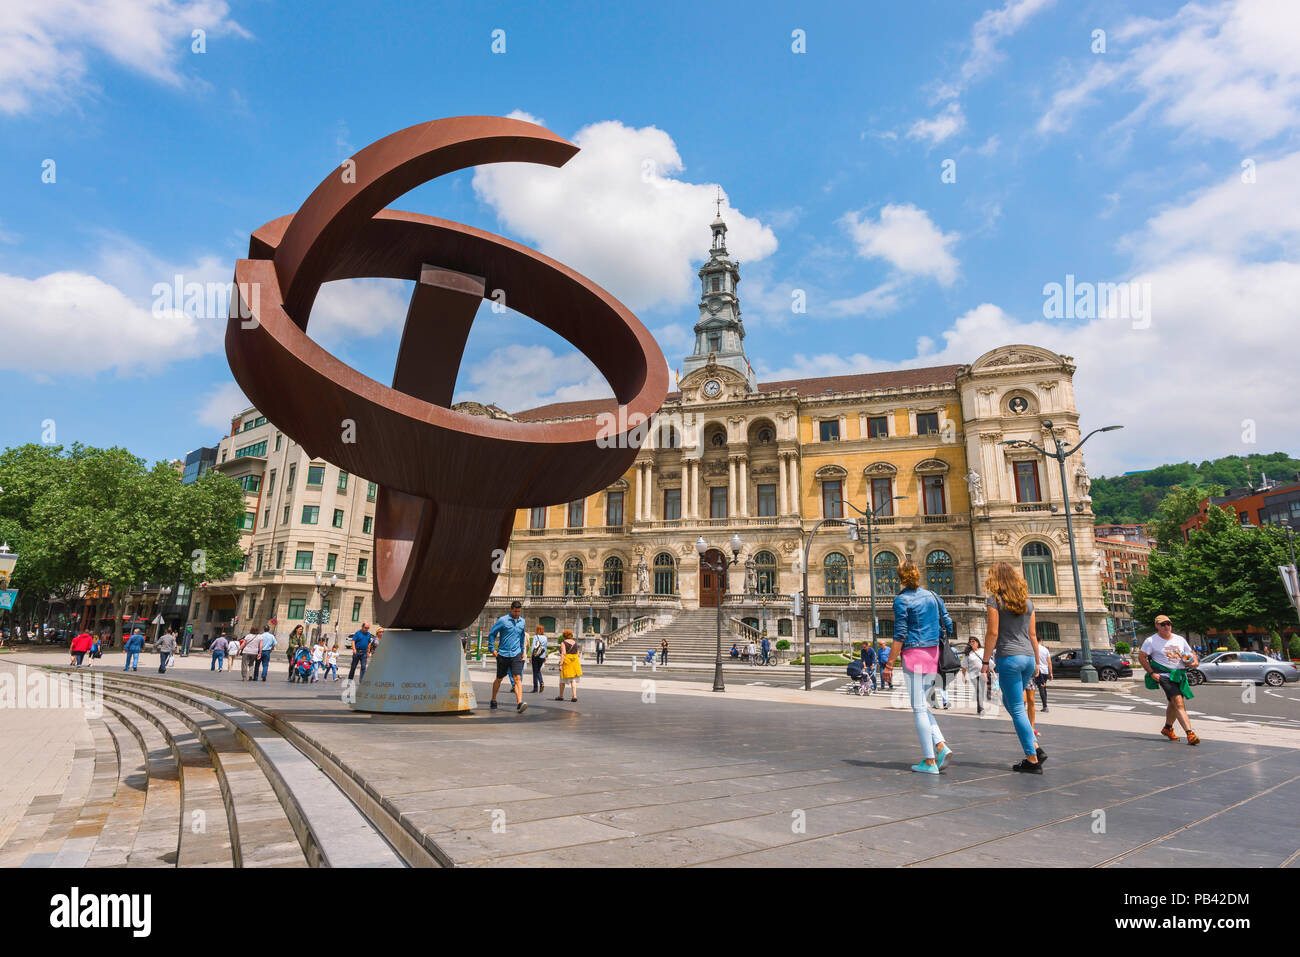 Bilbao city center, view of the Town Hall (Ayuntamiento) building and modernist sculpture titled The Alternative Ovoid (Jorge Oteiza) Bilbao, Spain. Stock Photo